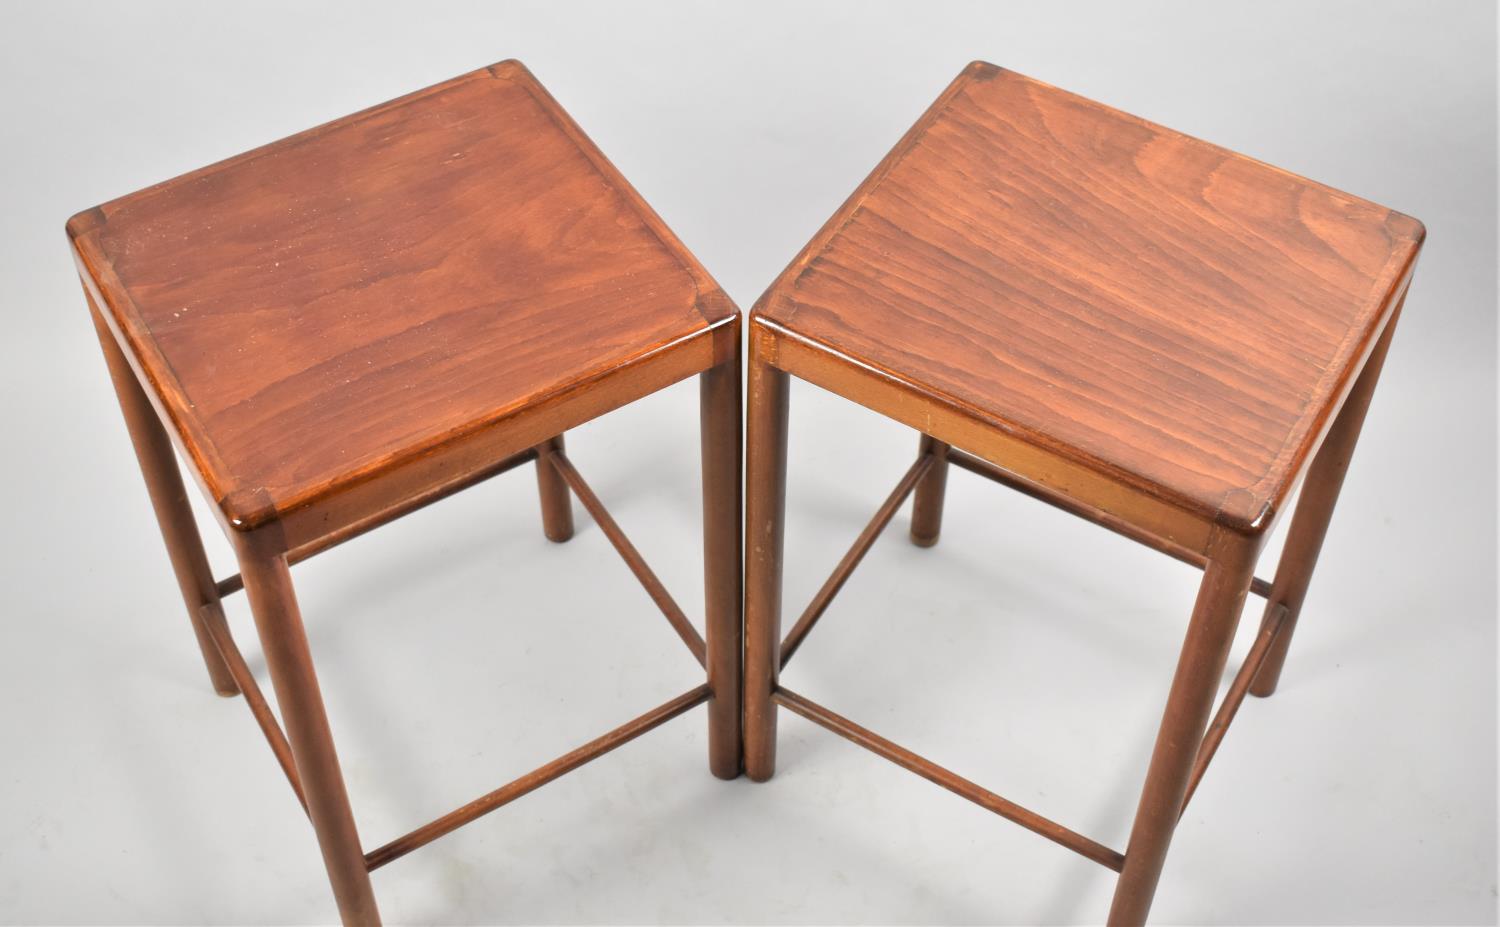 A Pair of Mid 20th Century Danish Square Topped Occasional Tables, each 50cm high - Image 2 of 2